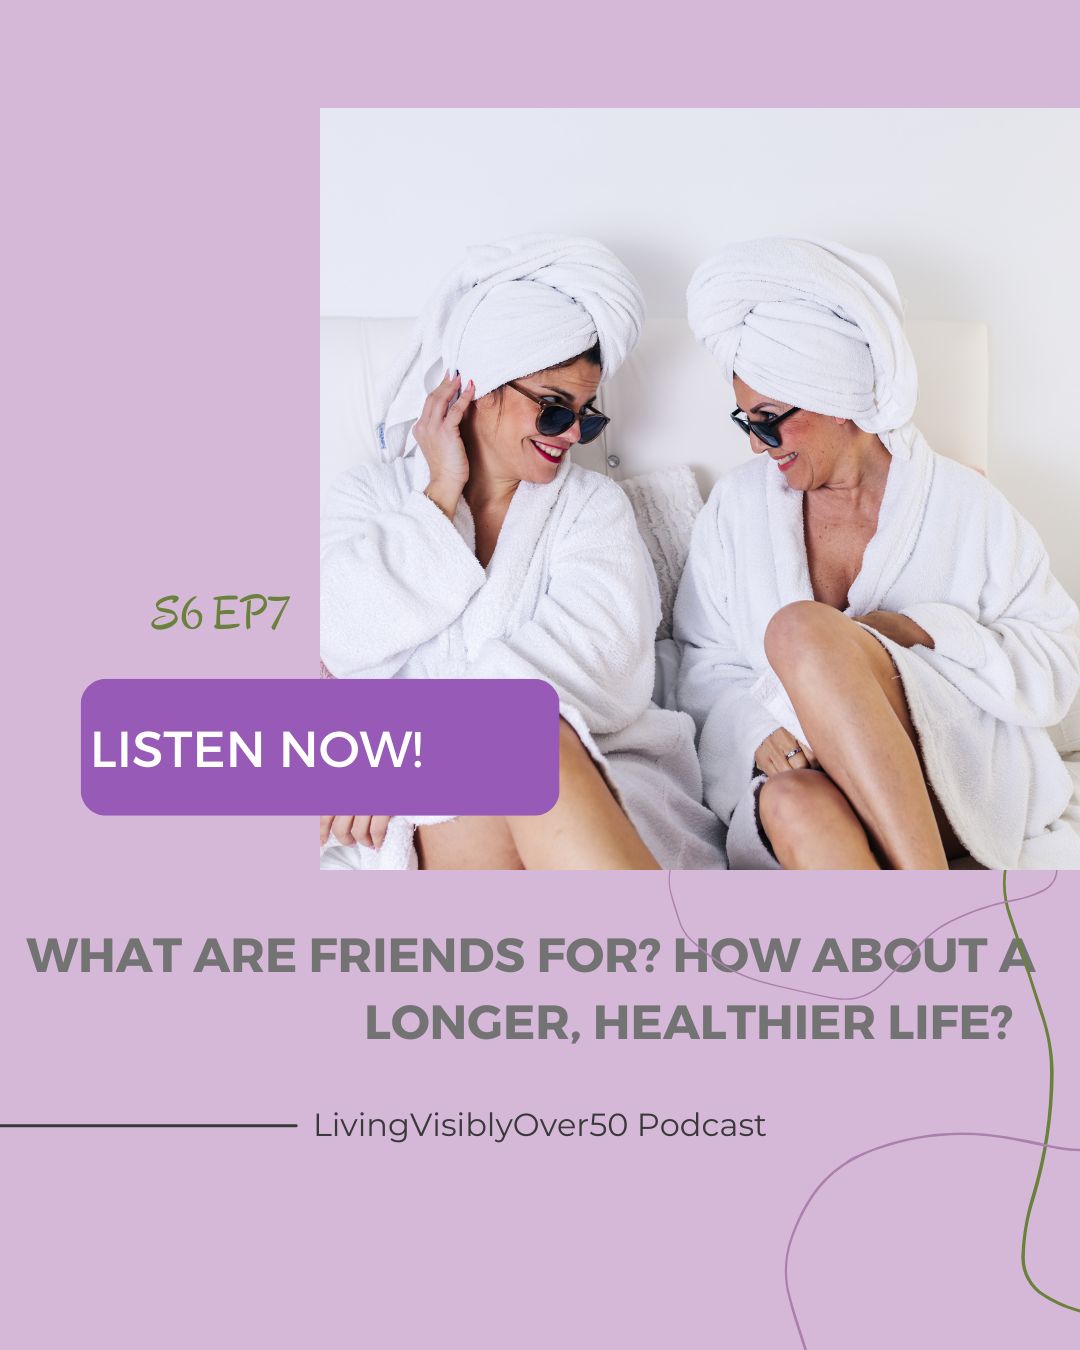 Living Visibly Over 50 Podcast Women Friendships